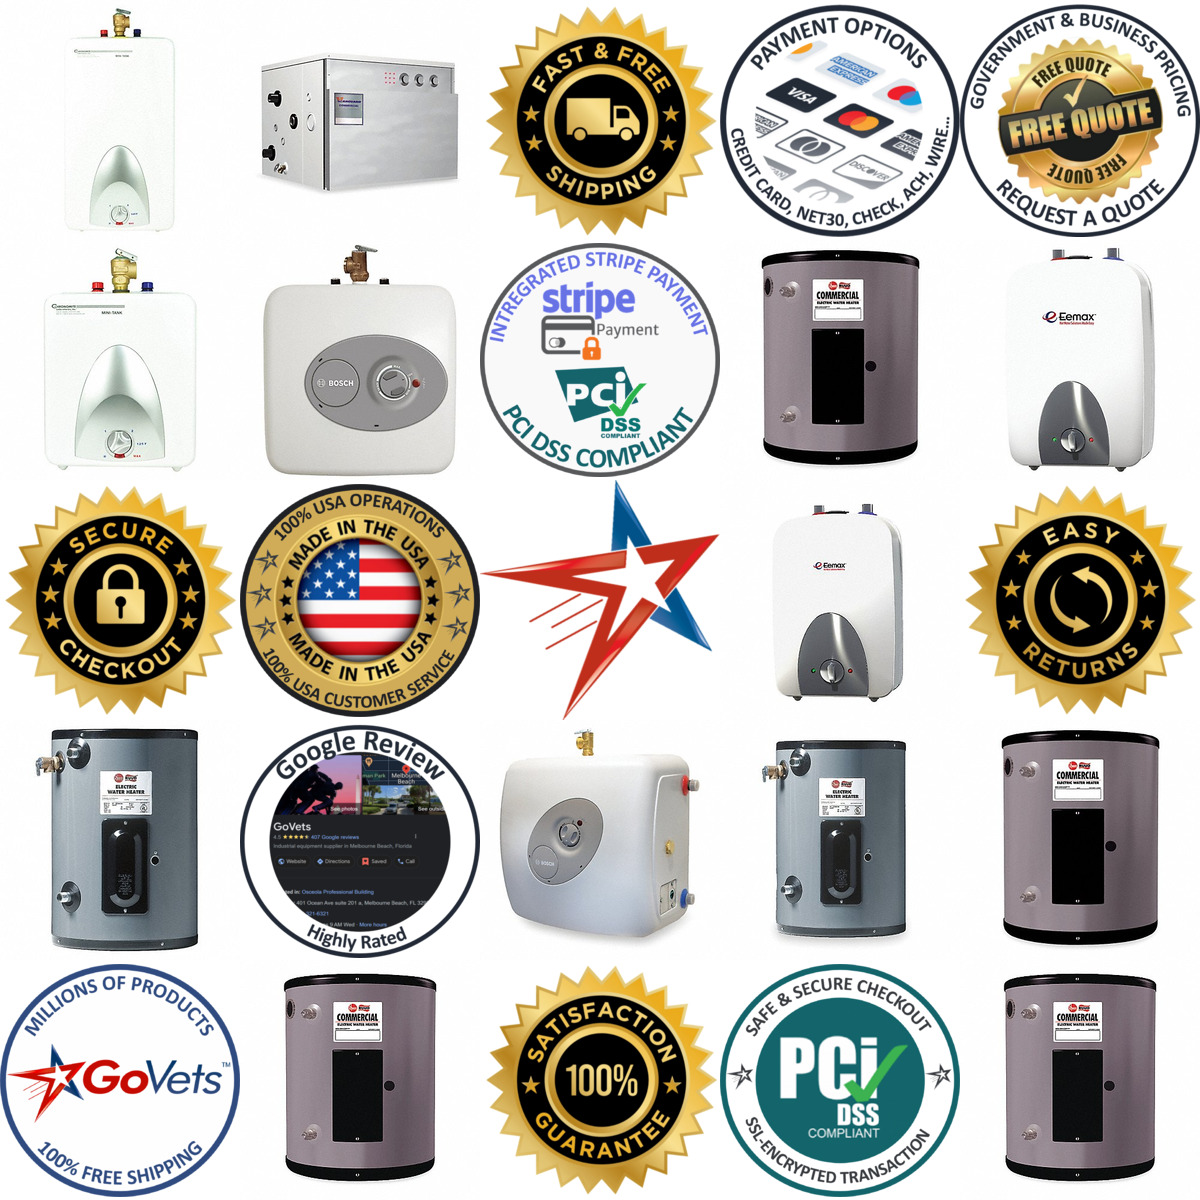 A selection of Point of Use Tank Water Heaters products on GoVets